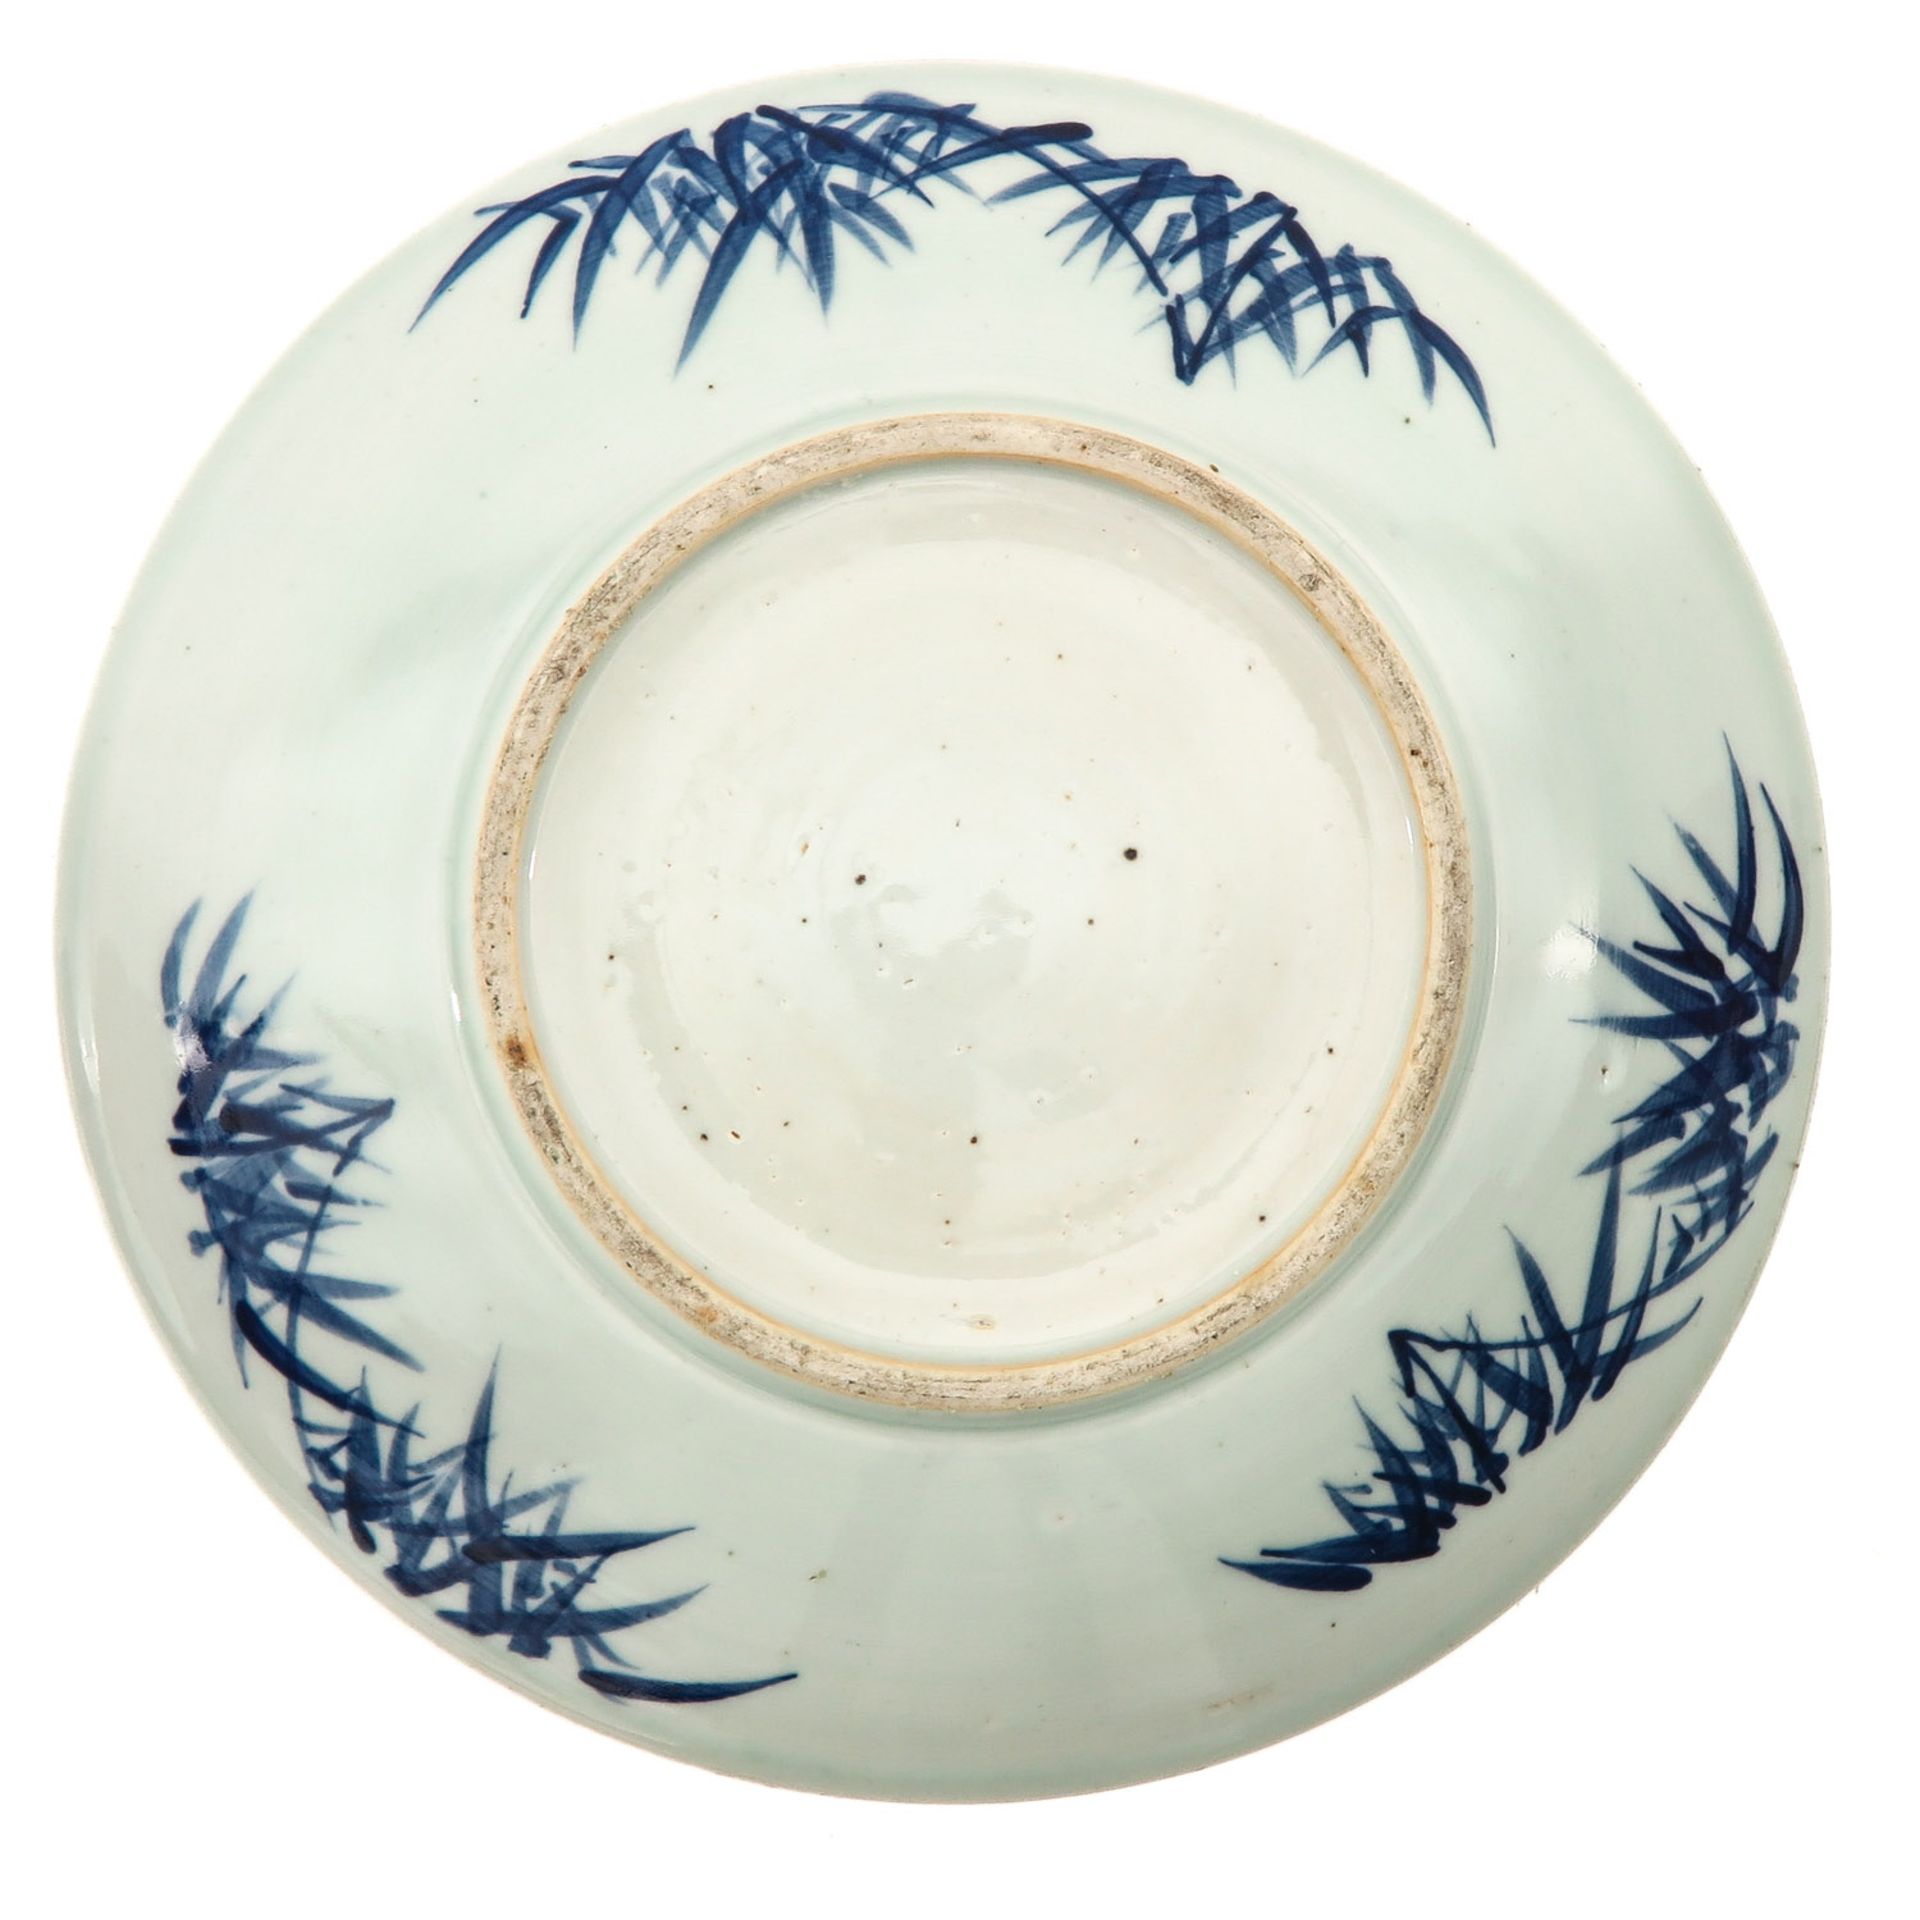 A Blue and White Plate - Image 2 of 5